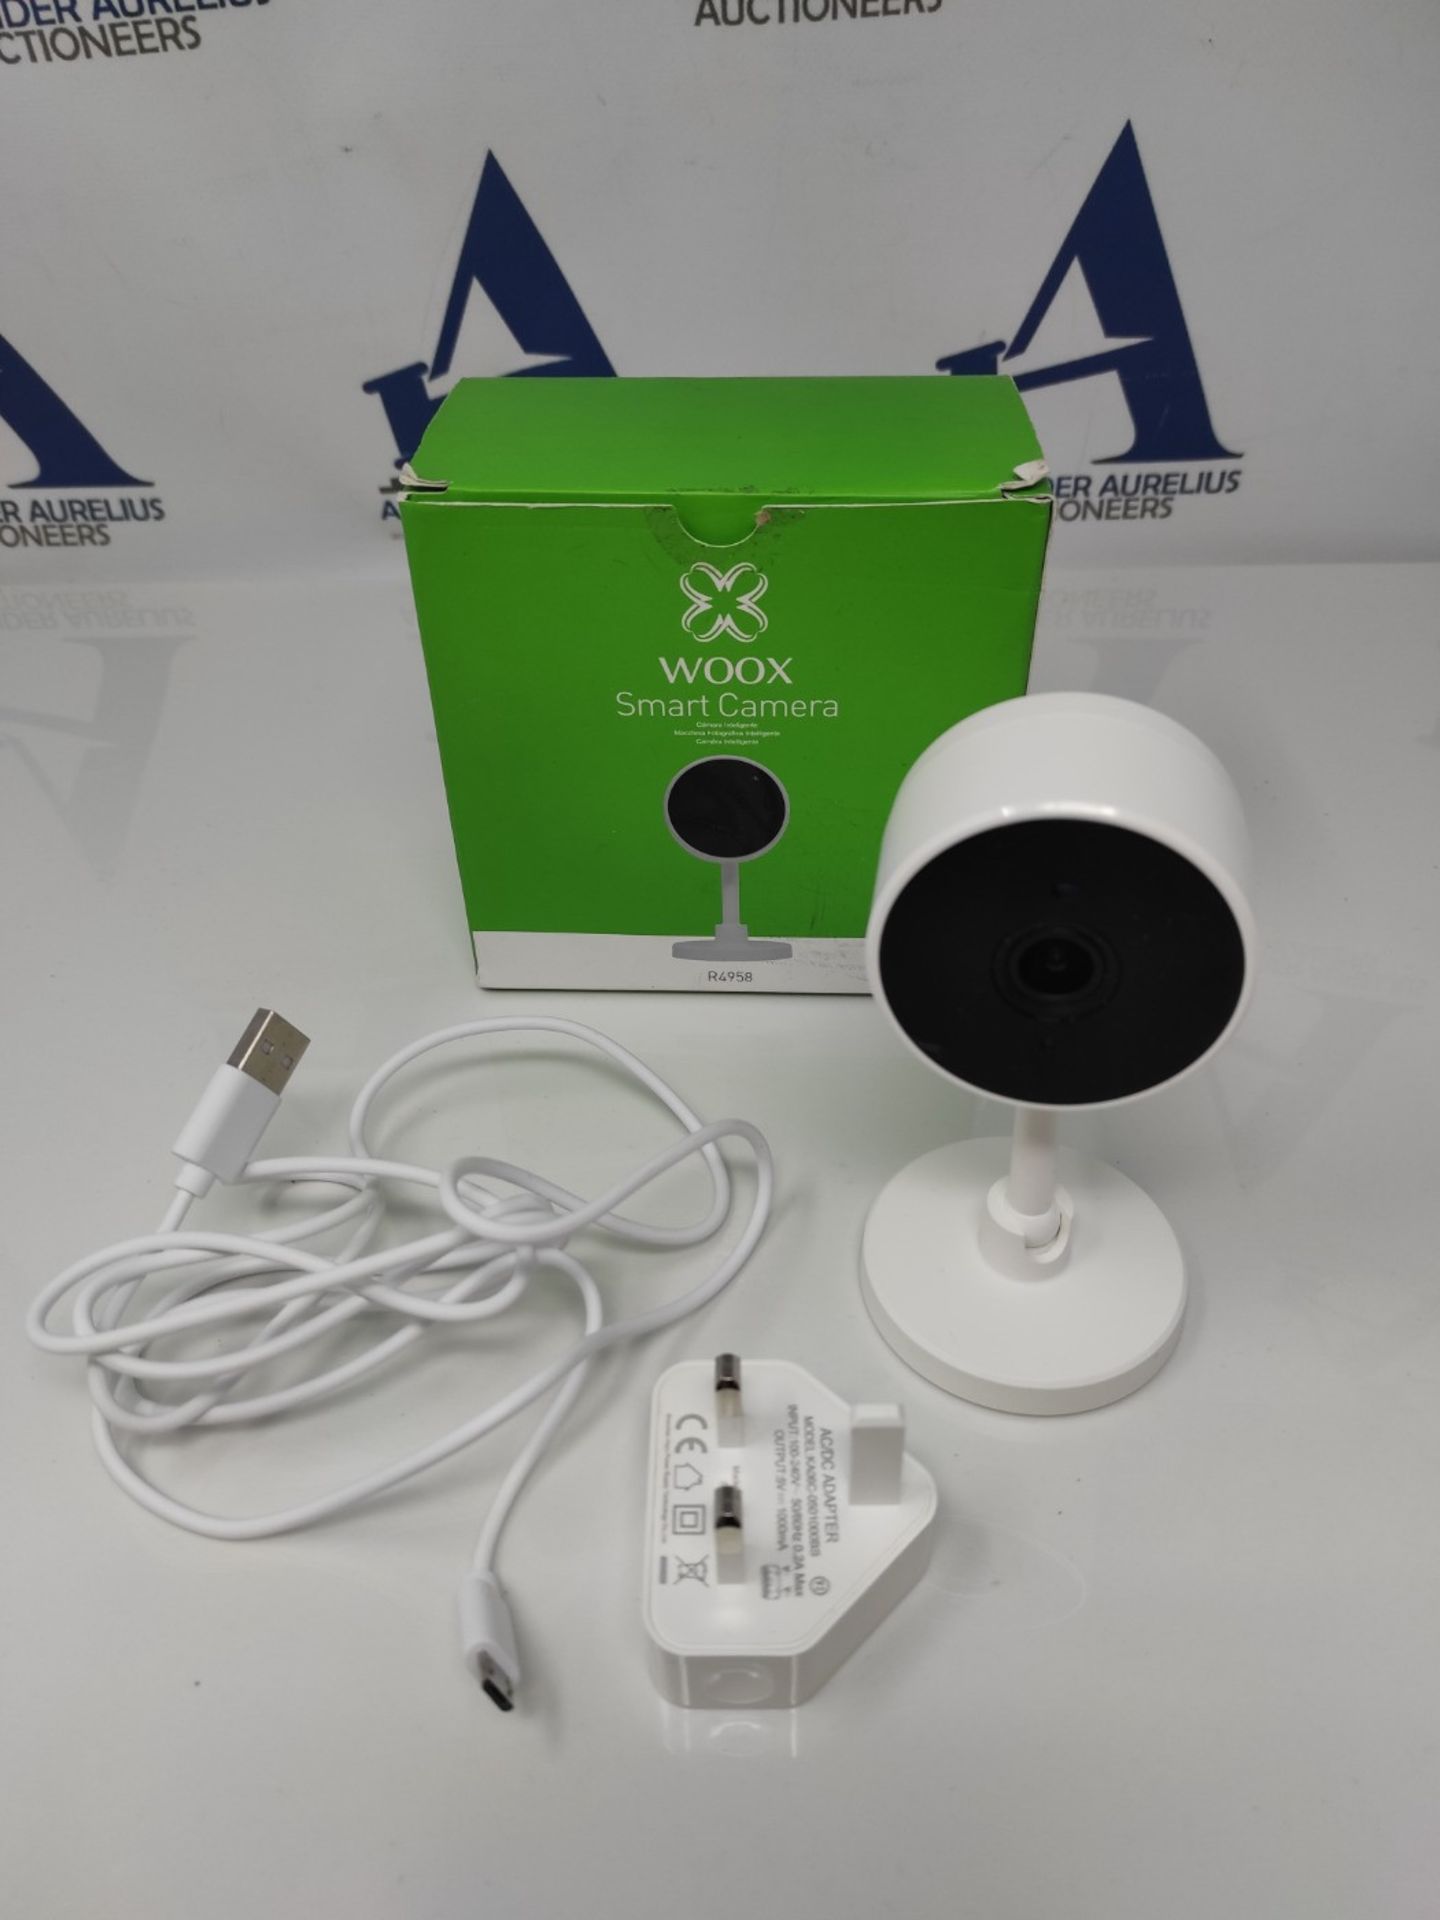 Woox Smart Camera 1080P Wifi IP Security Camera with Night Vision Motion Detection 2-W